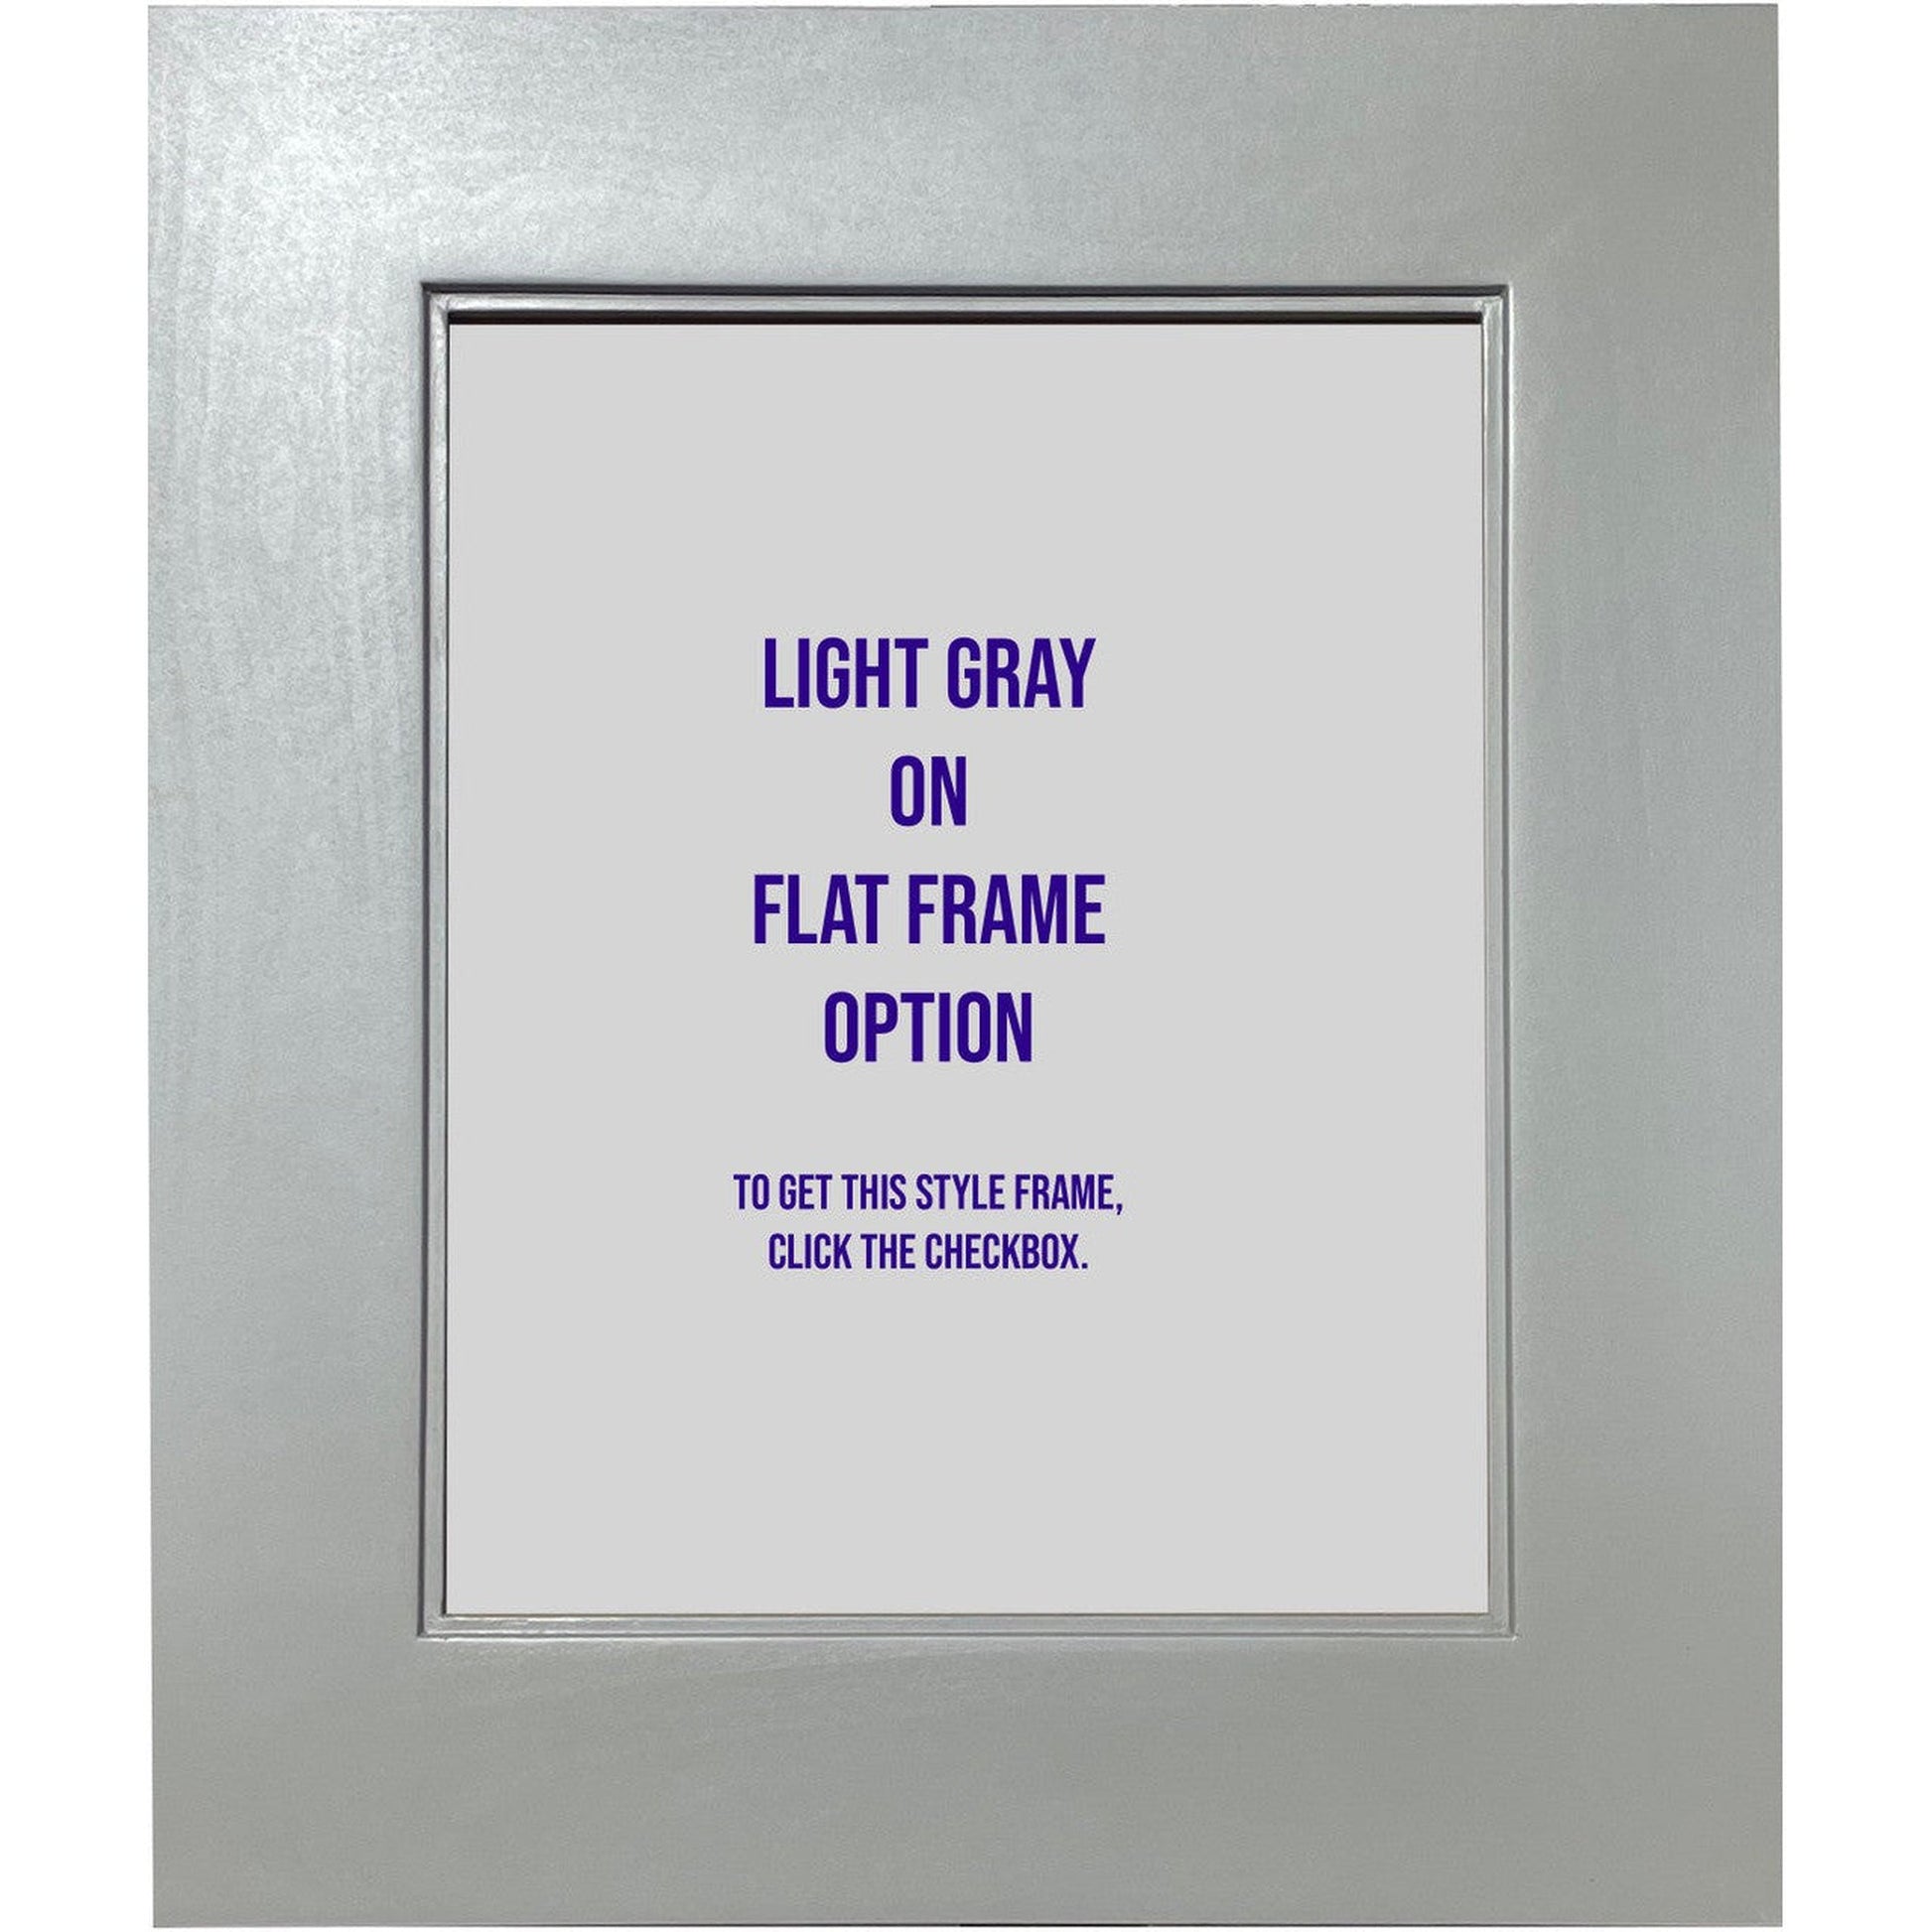 Fox Hollow Furnishings 20" x 17" Light Gray Wall Mount Picture Frame Medicine Cabinet